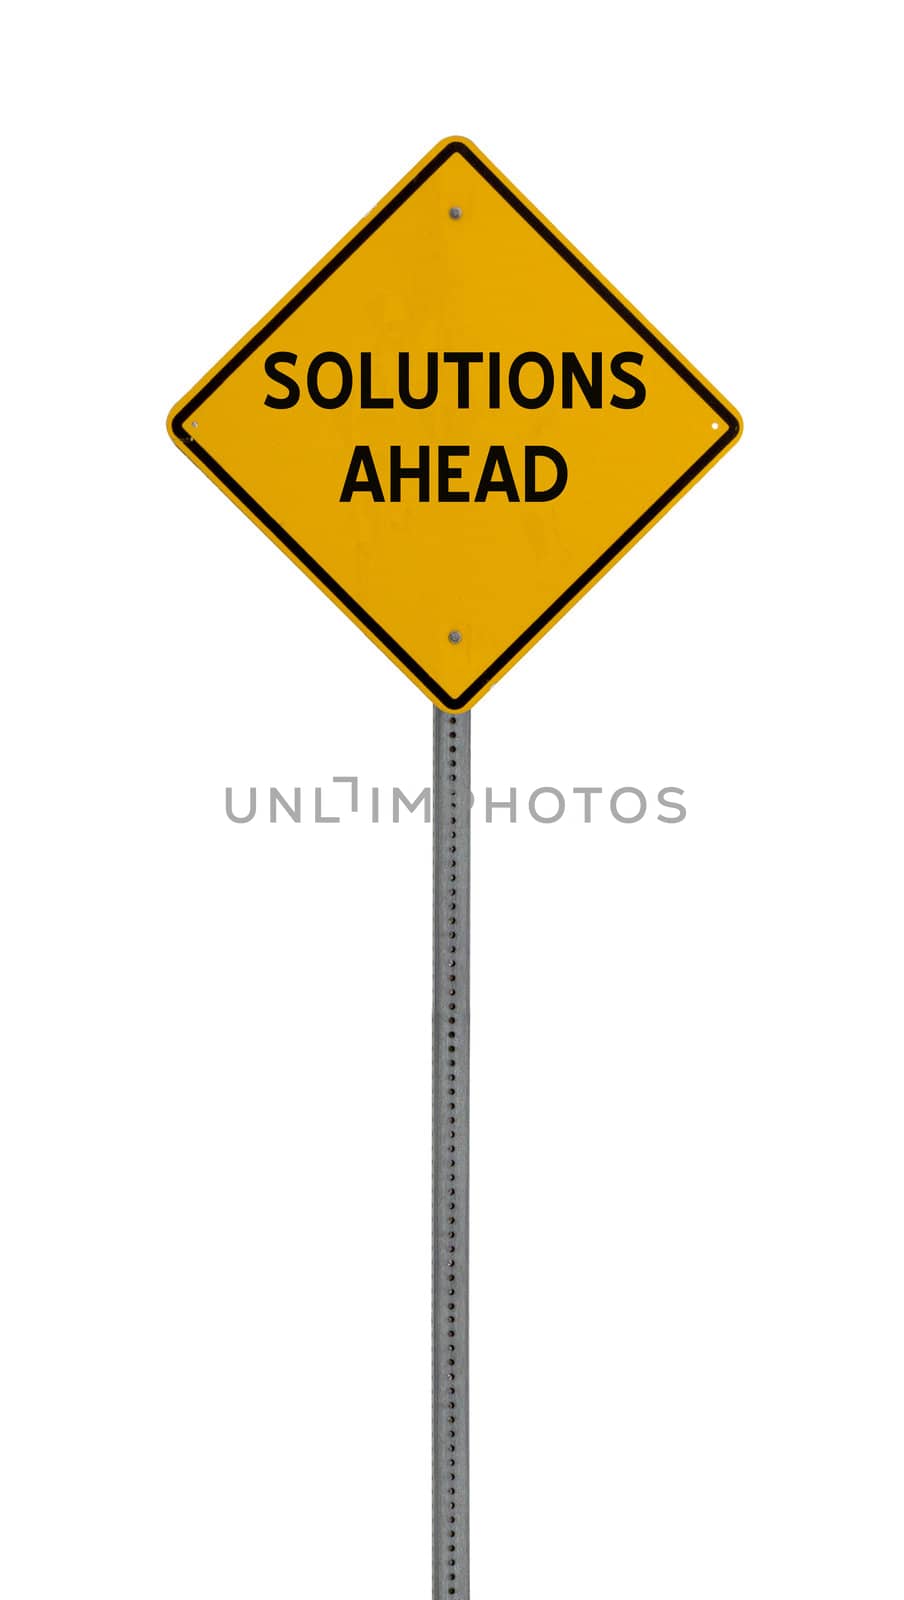 solutions ahead - Yellow road warning sign by jeremywhat